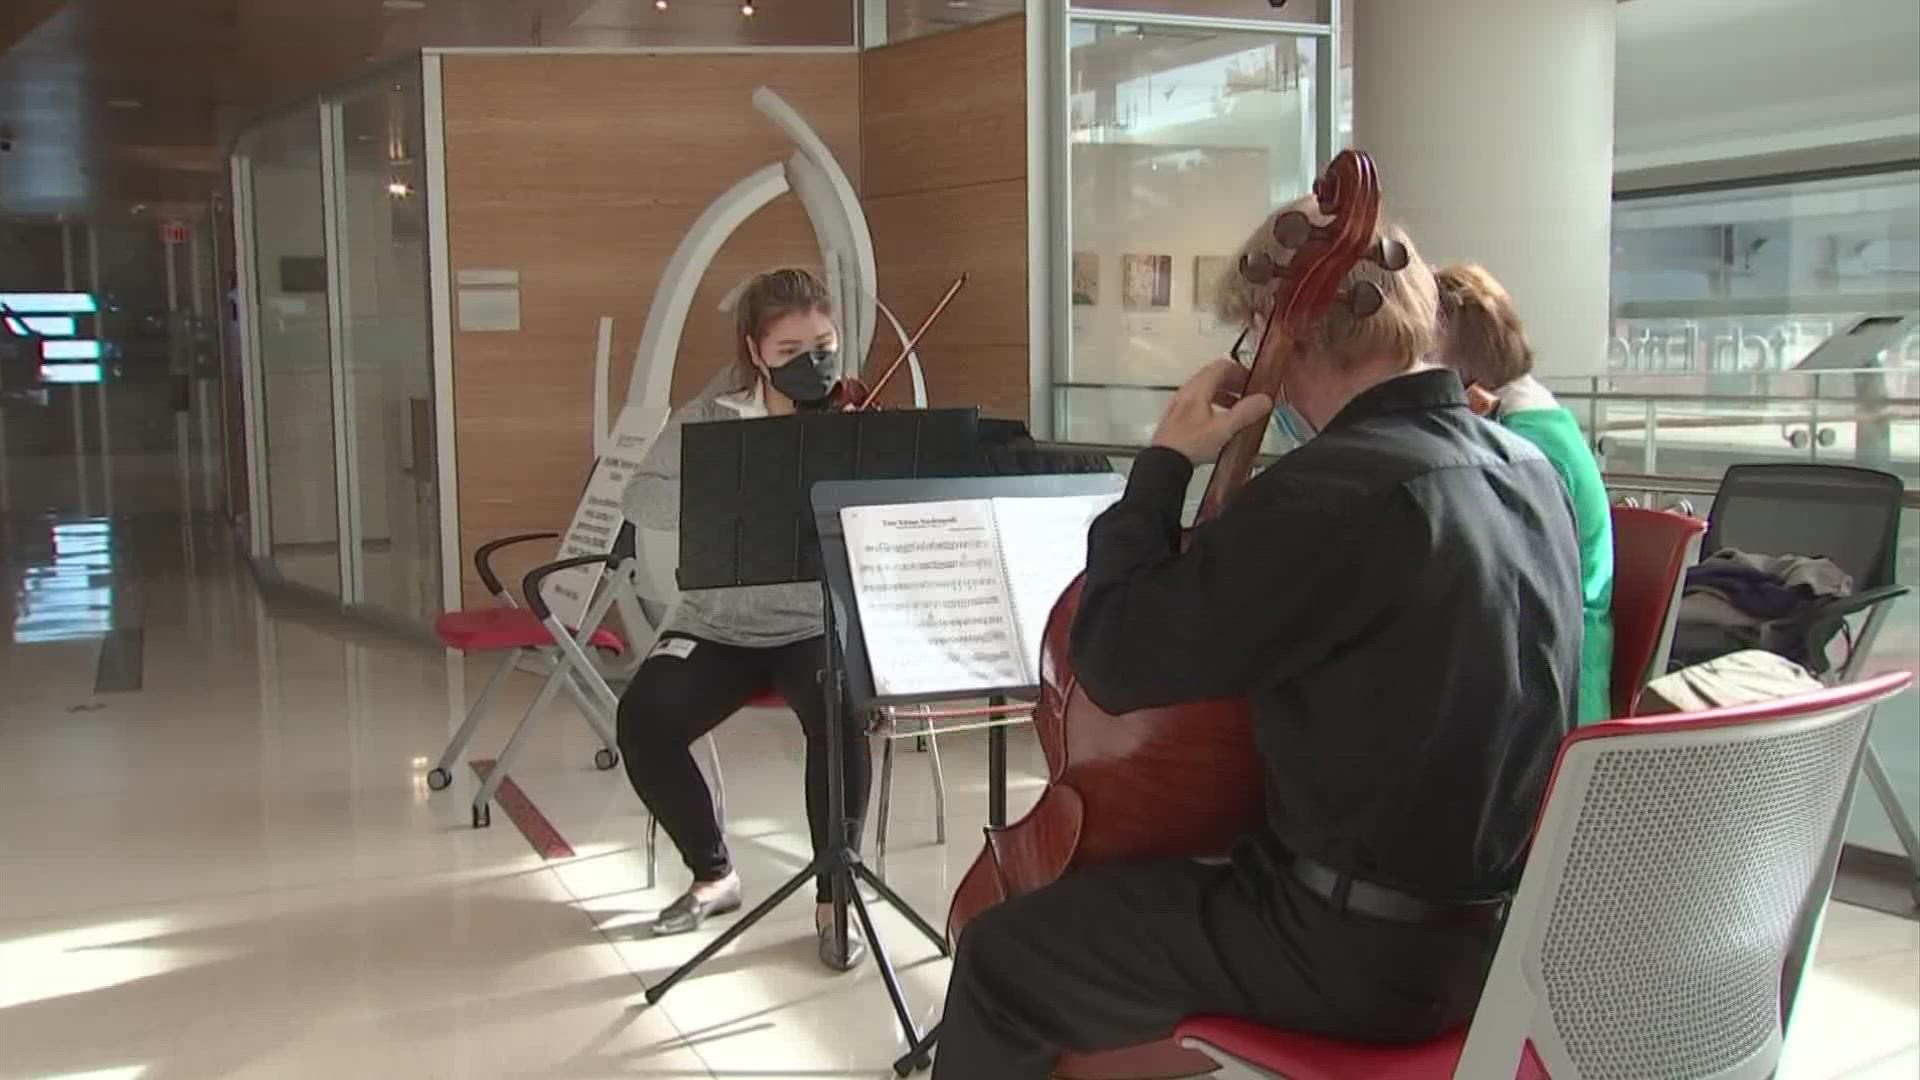 The musicians perform at the OSU network of hospitals weekly through the OSUWMC Health Care Workers Wellness Fund.